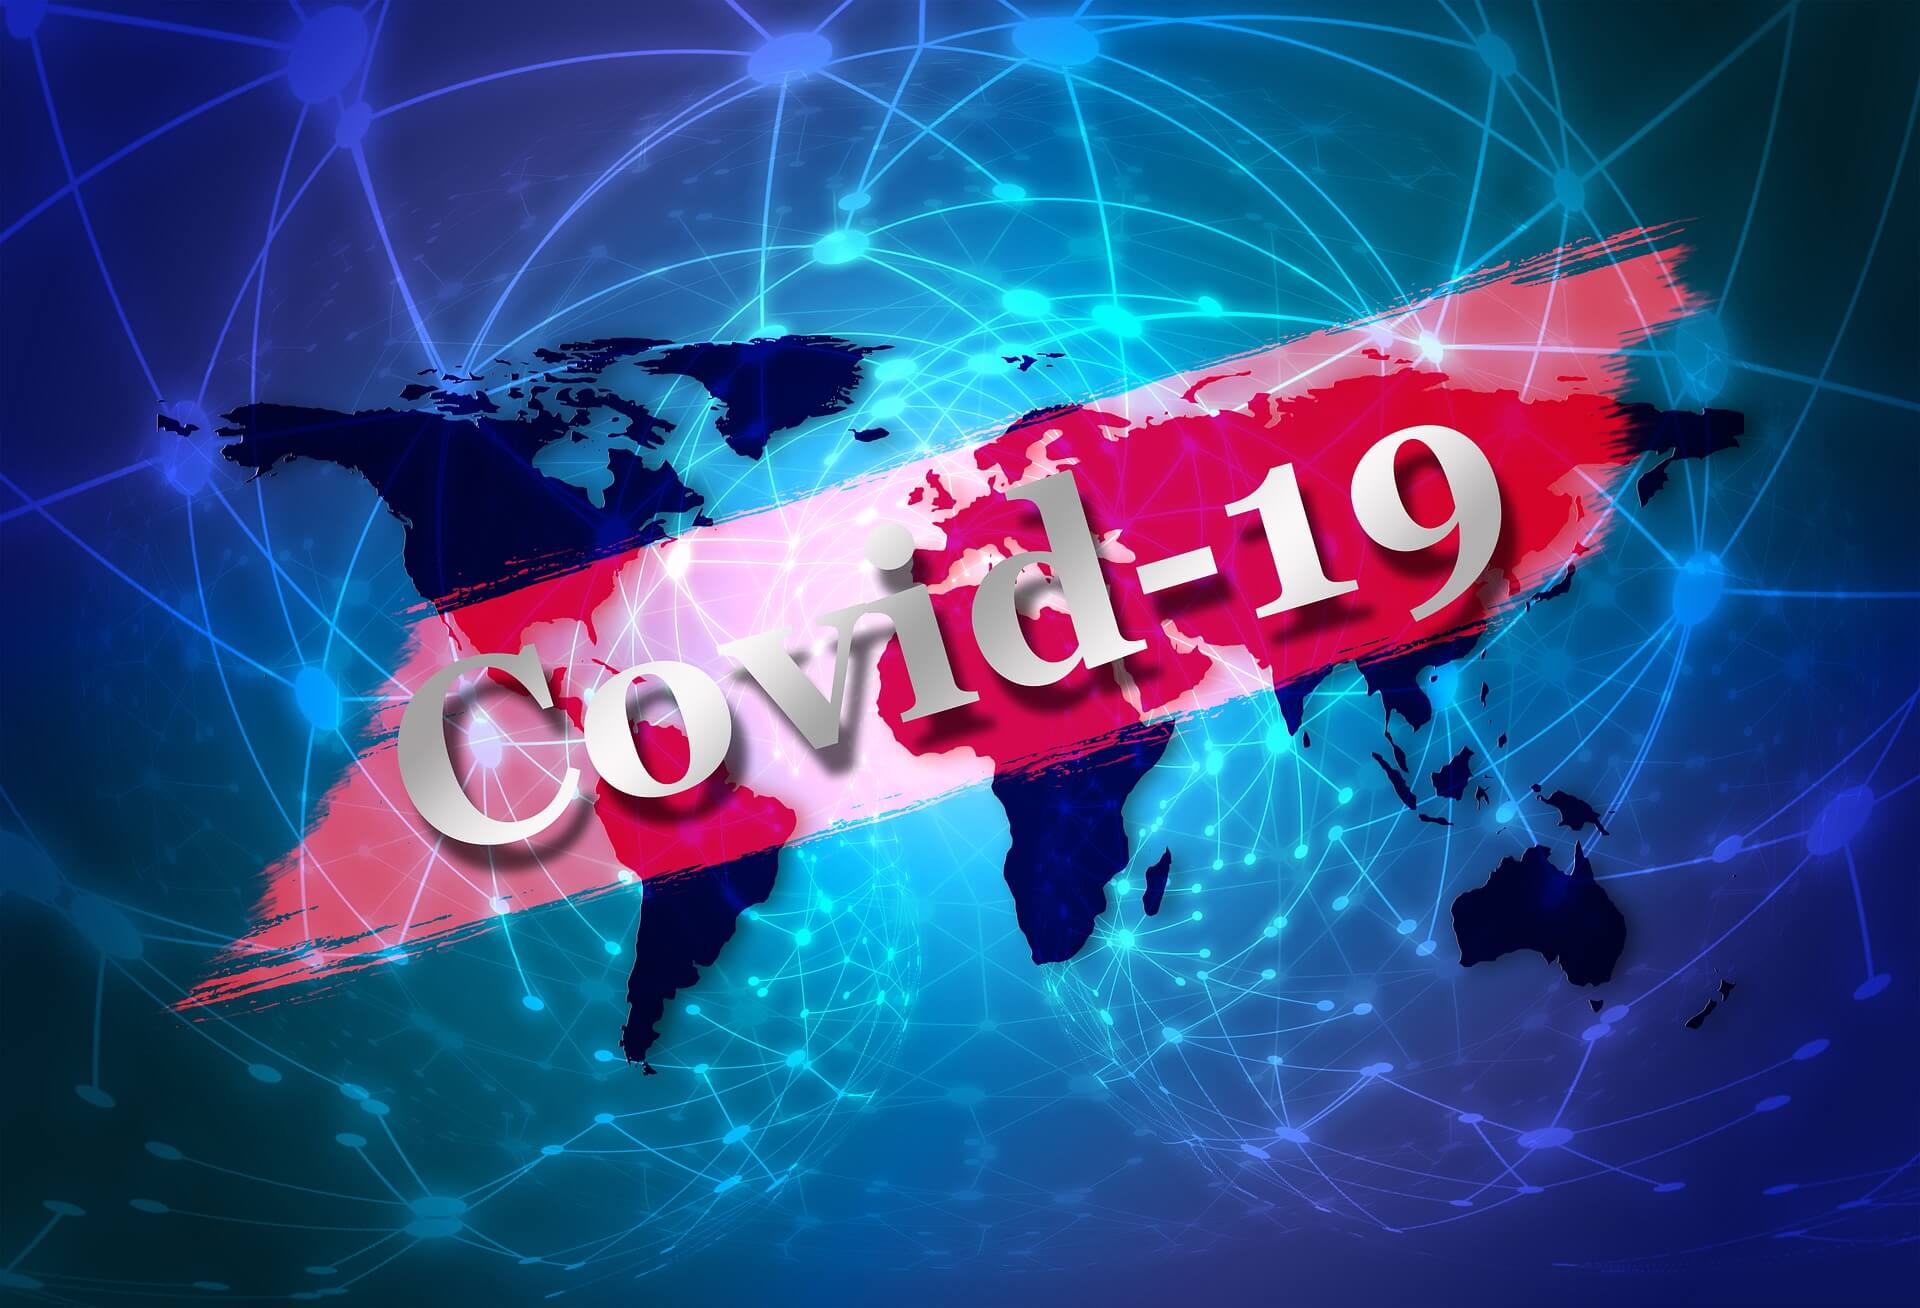 LATEST CONFIRMED CASES OF COVID-19 IN SOUTH AFRICA (7 Aug 2020) - NICD